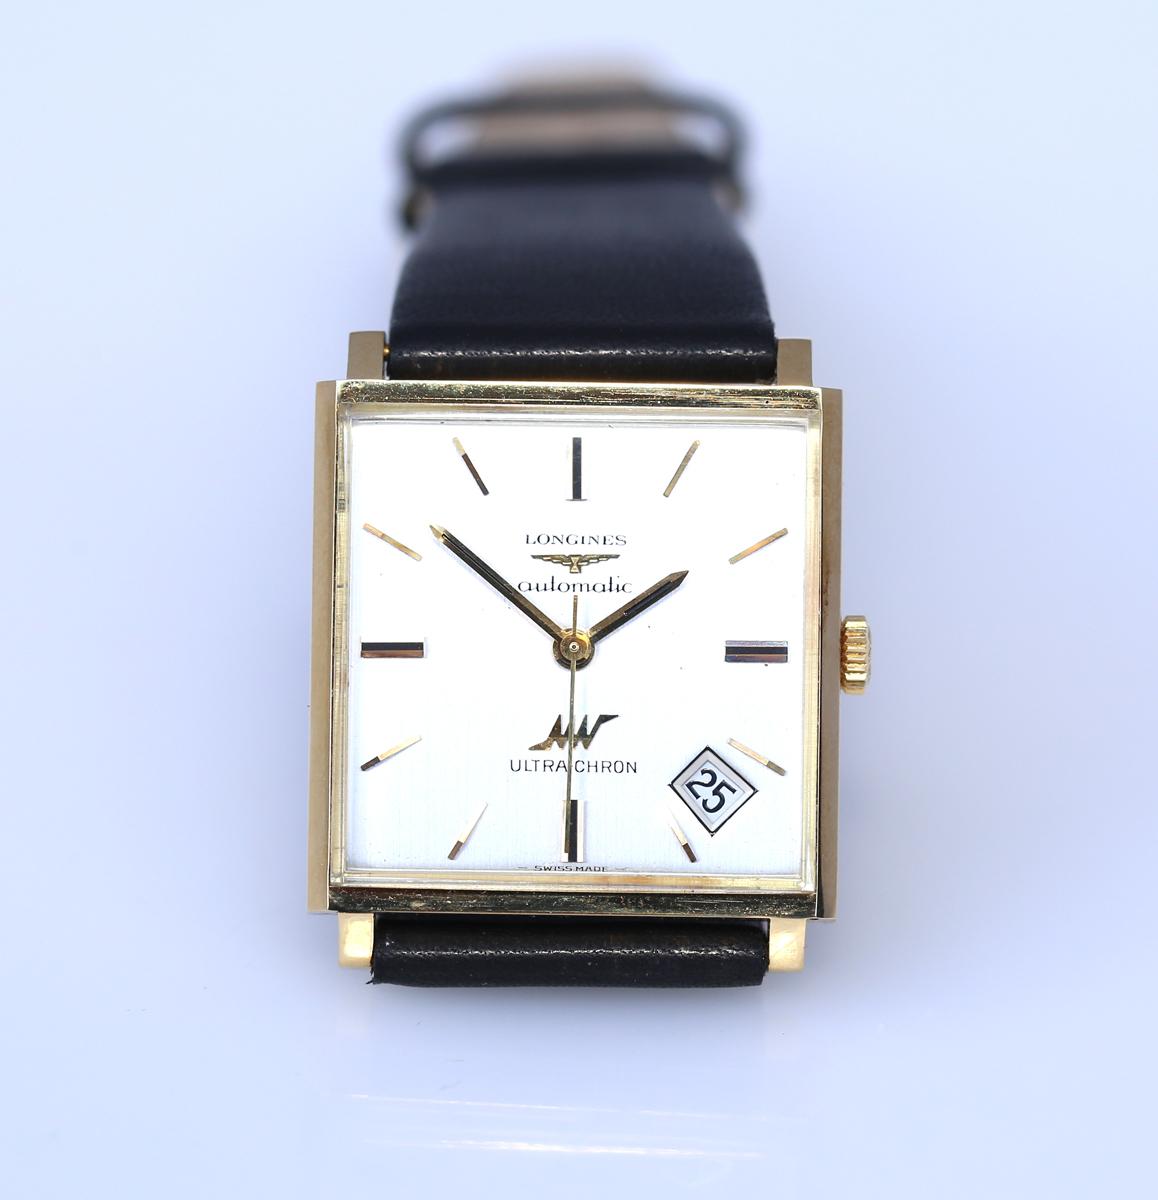 Longines Swiss made Mechanical watch with  Automatic movement. Date, Square shape 18K Yellow Gold case. 1970 design. Dial, mechanism, head and case all signed Longines.

The watch is in really good condition. Both dial and case are untouched. The